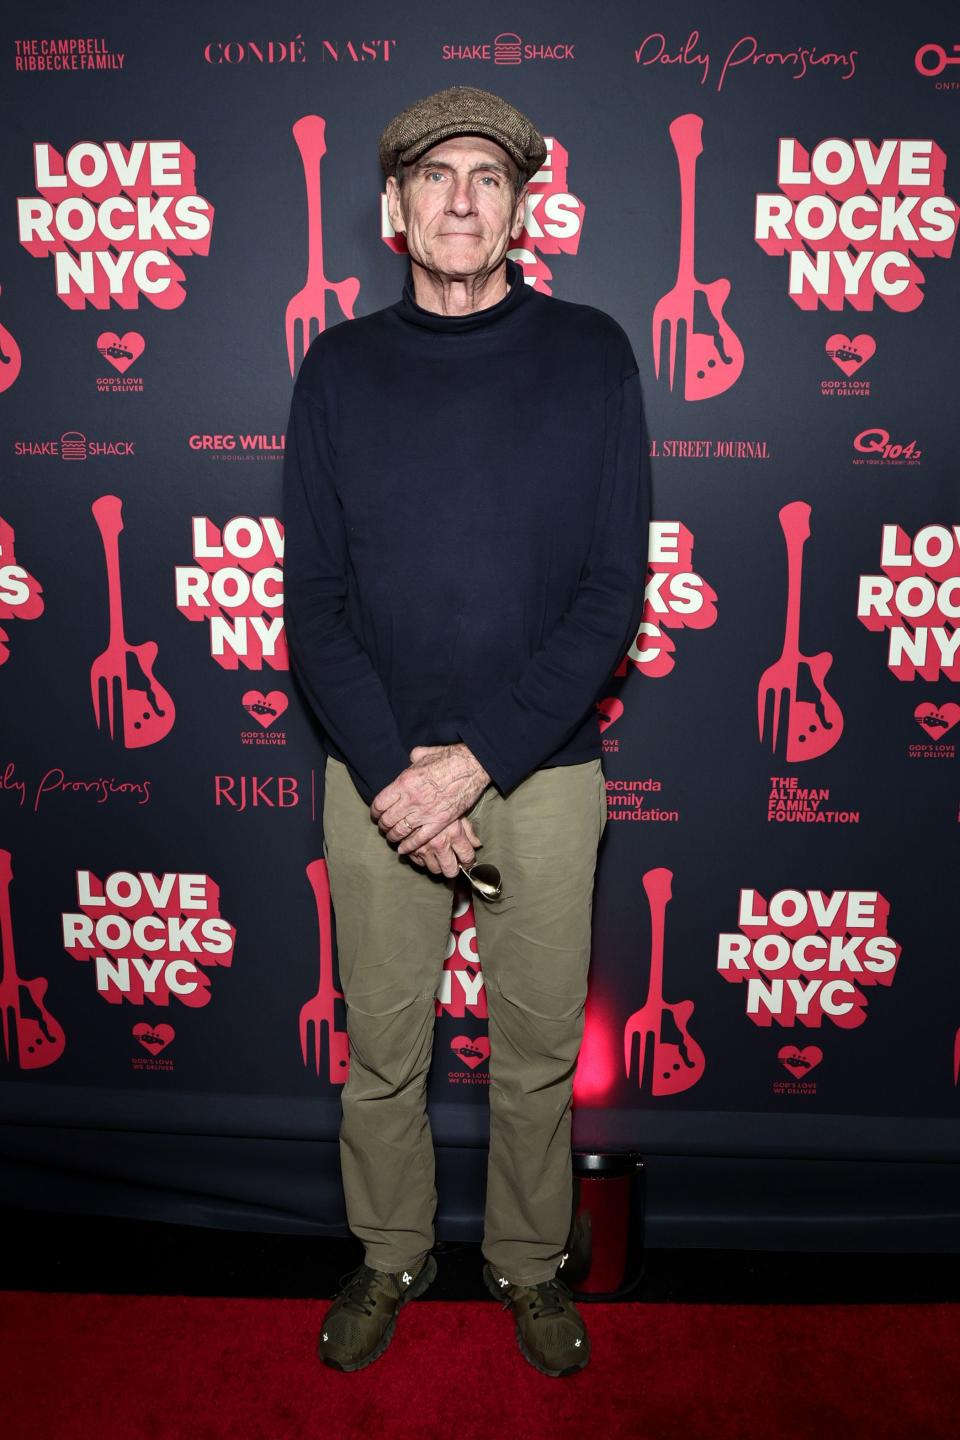 NEW YORK, NEW YORK - MARCH 09: James Taylor appears at the Seventh Annual LOVE ROCKS NYC Benefit Concert for God’s Love We Deliver at Beacon Theatre on March 09, 2023 in New York City. (Photo by Jamie McCarthy/Getty Images for Love Rocks NYC/God's Love We Deliver)